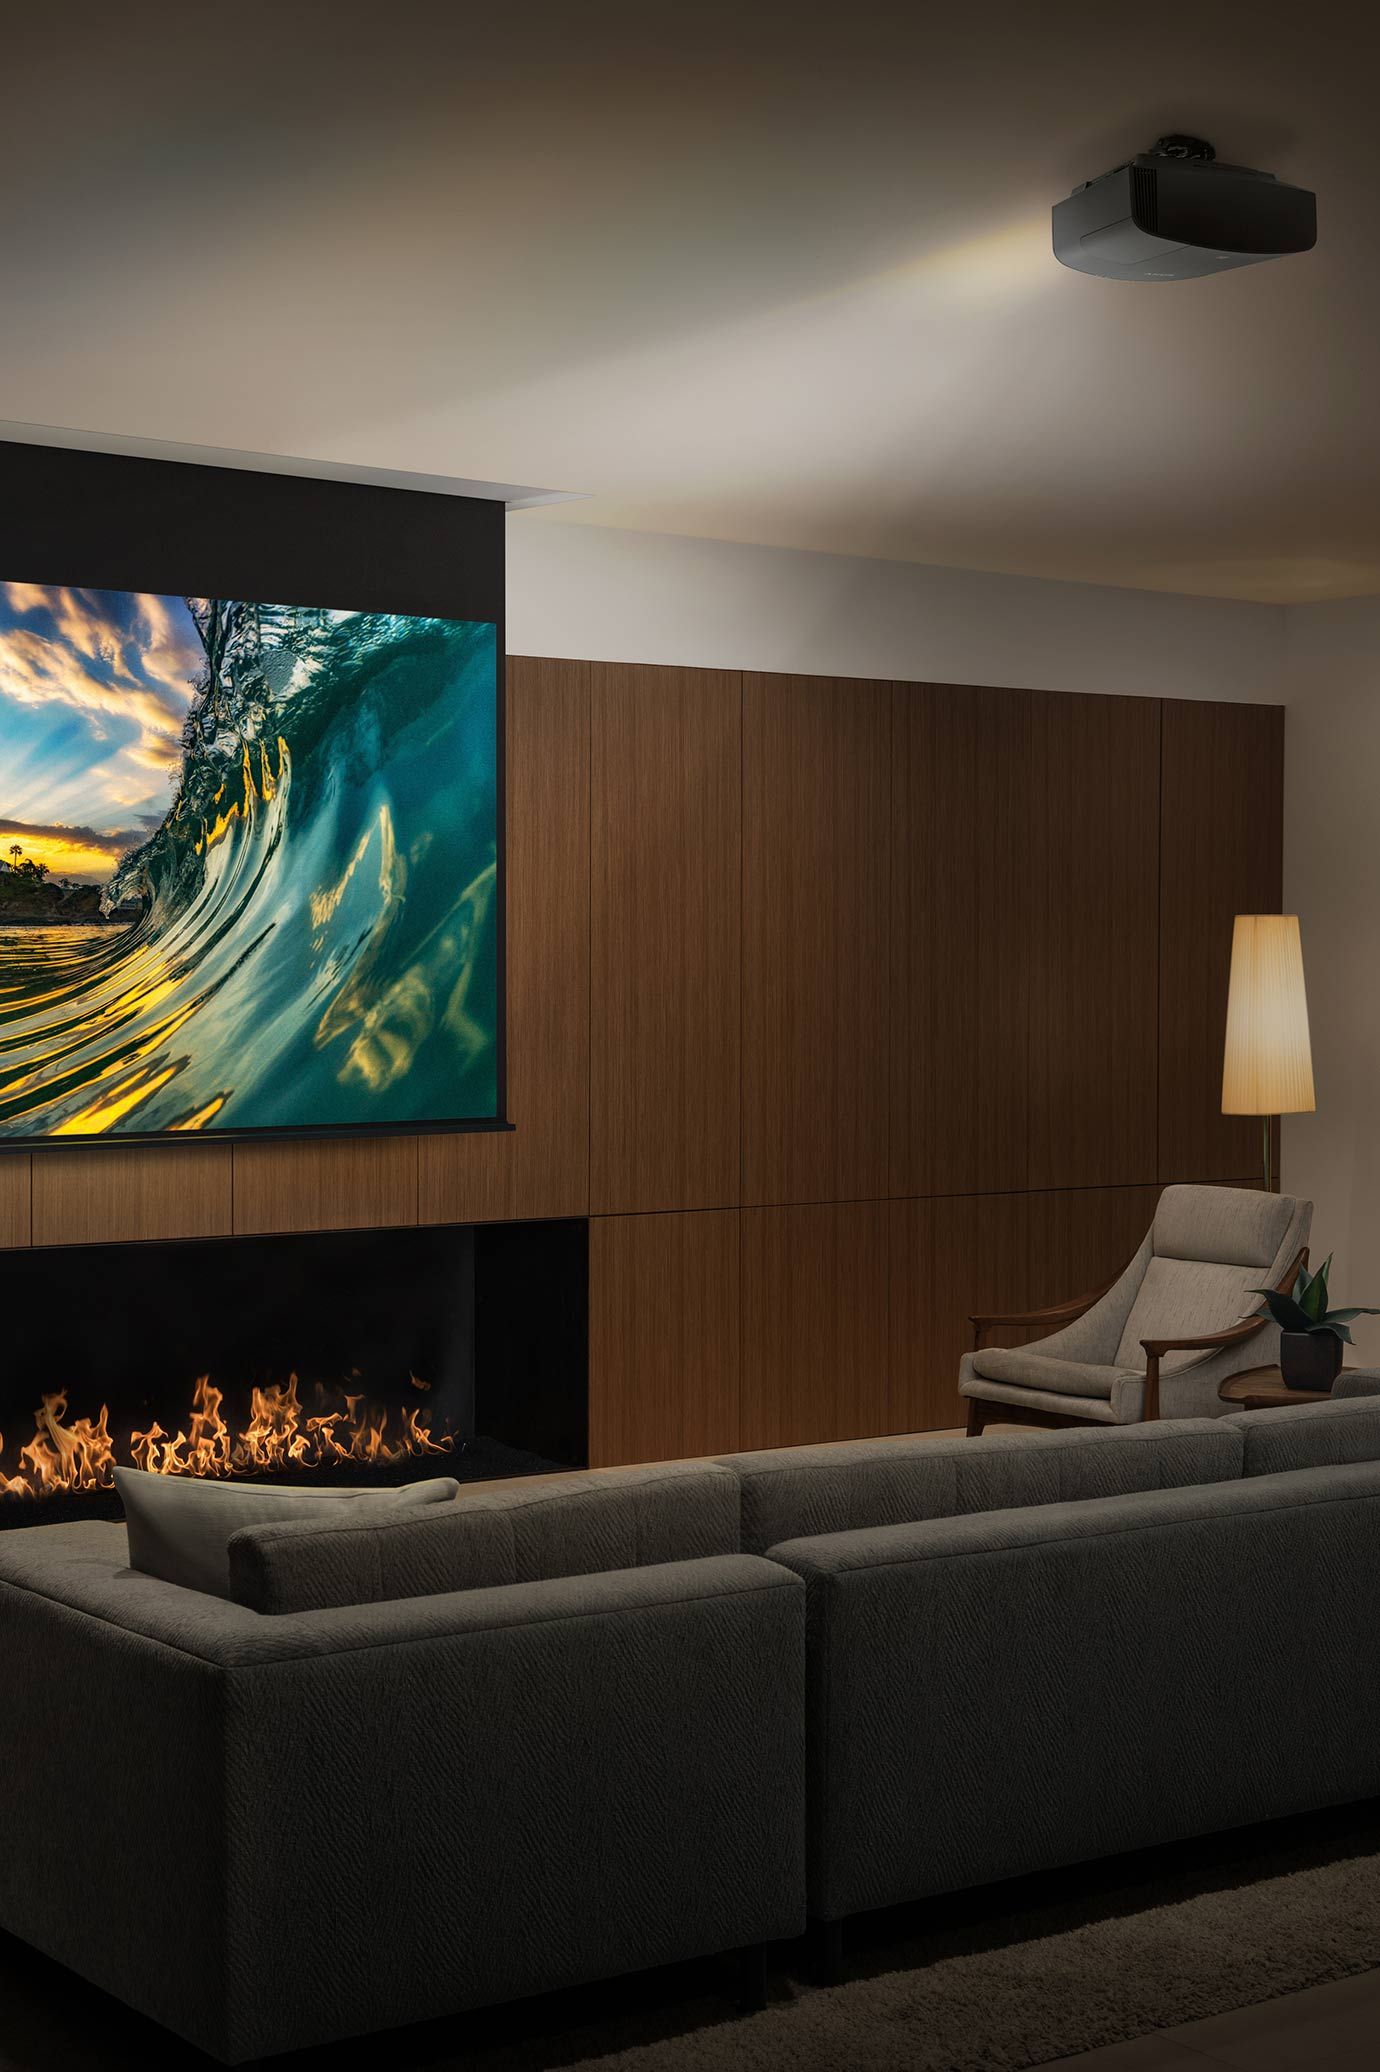 Sony image of a projector and theater screen